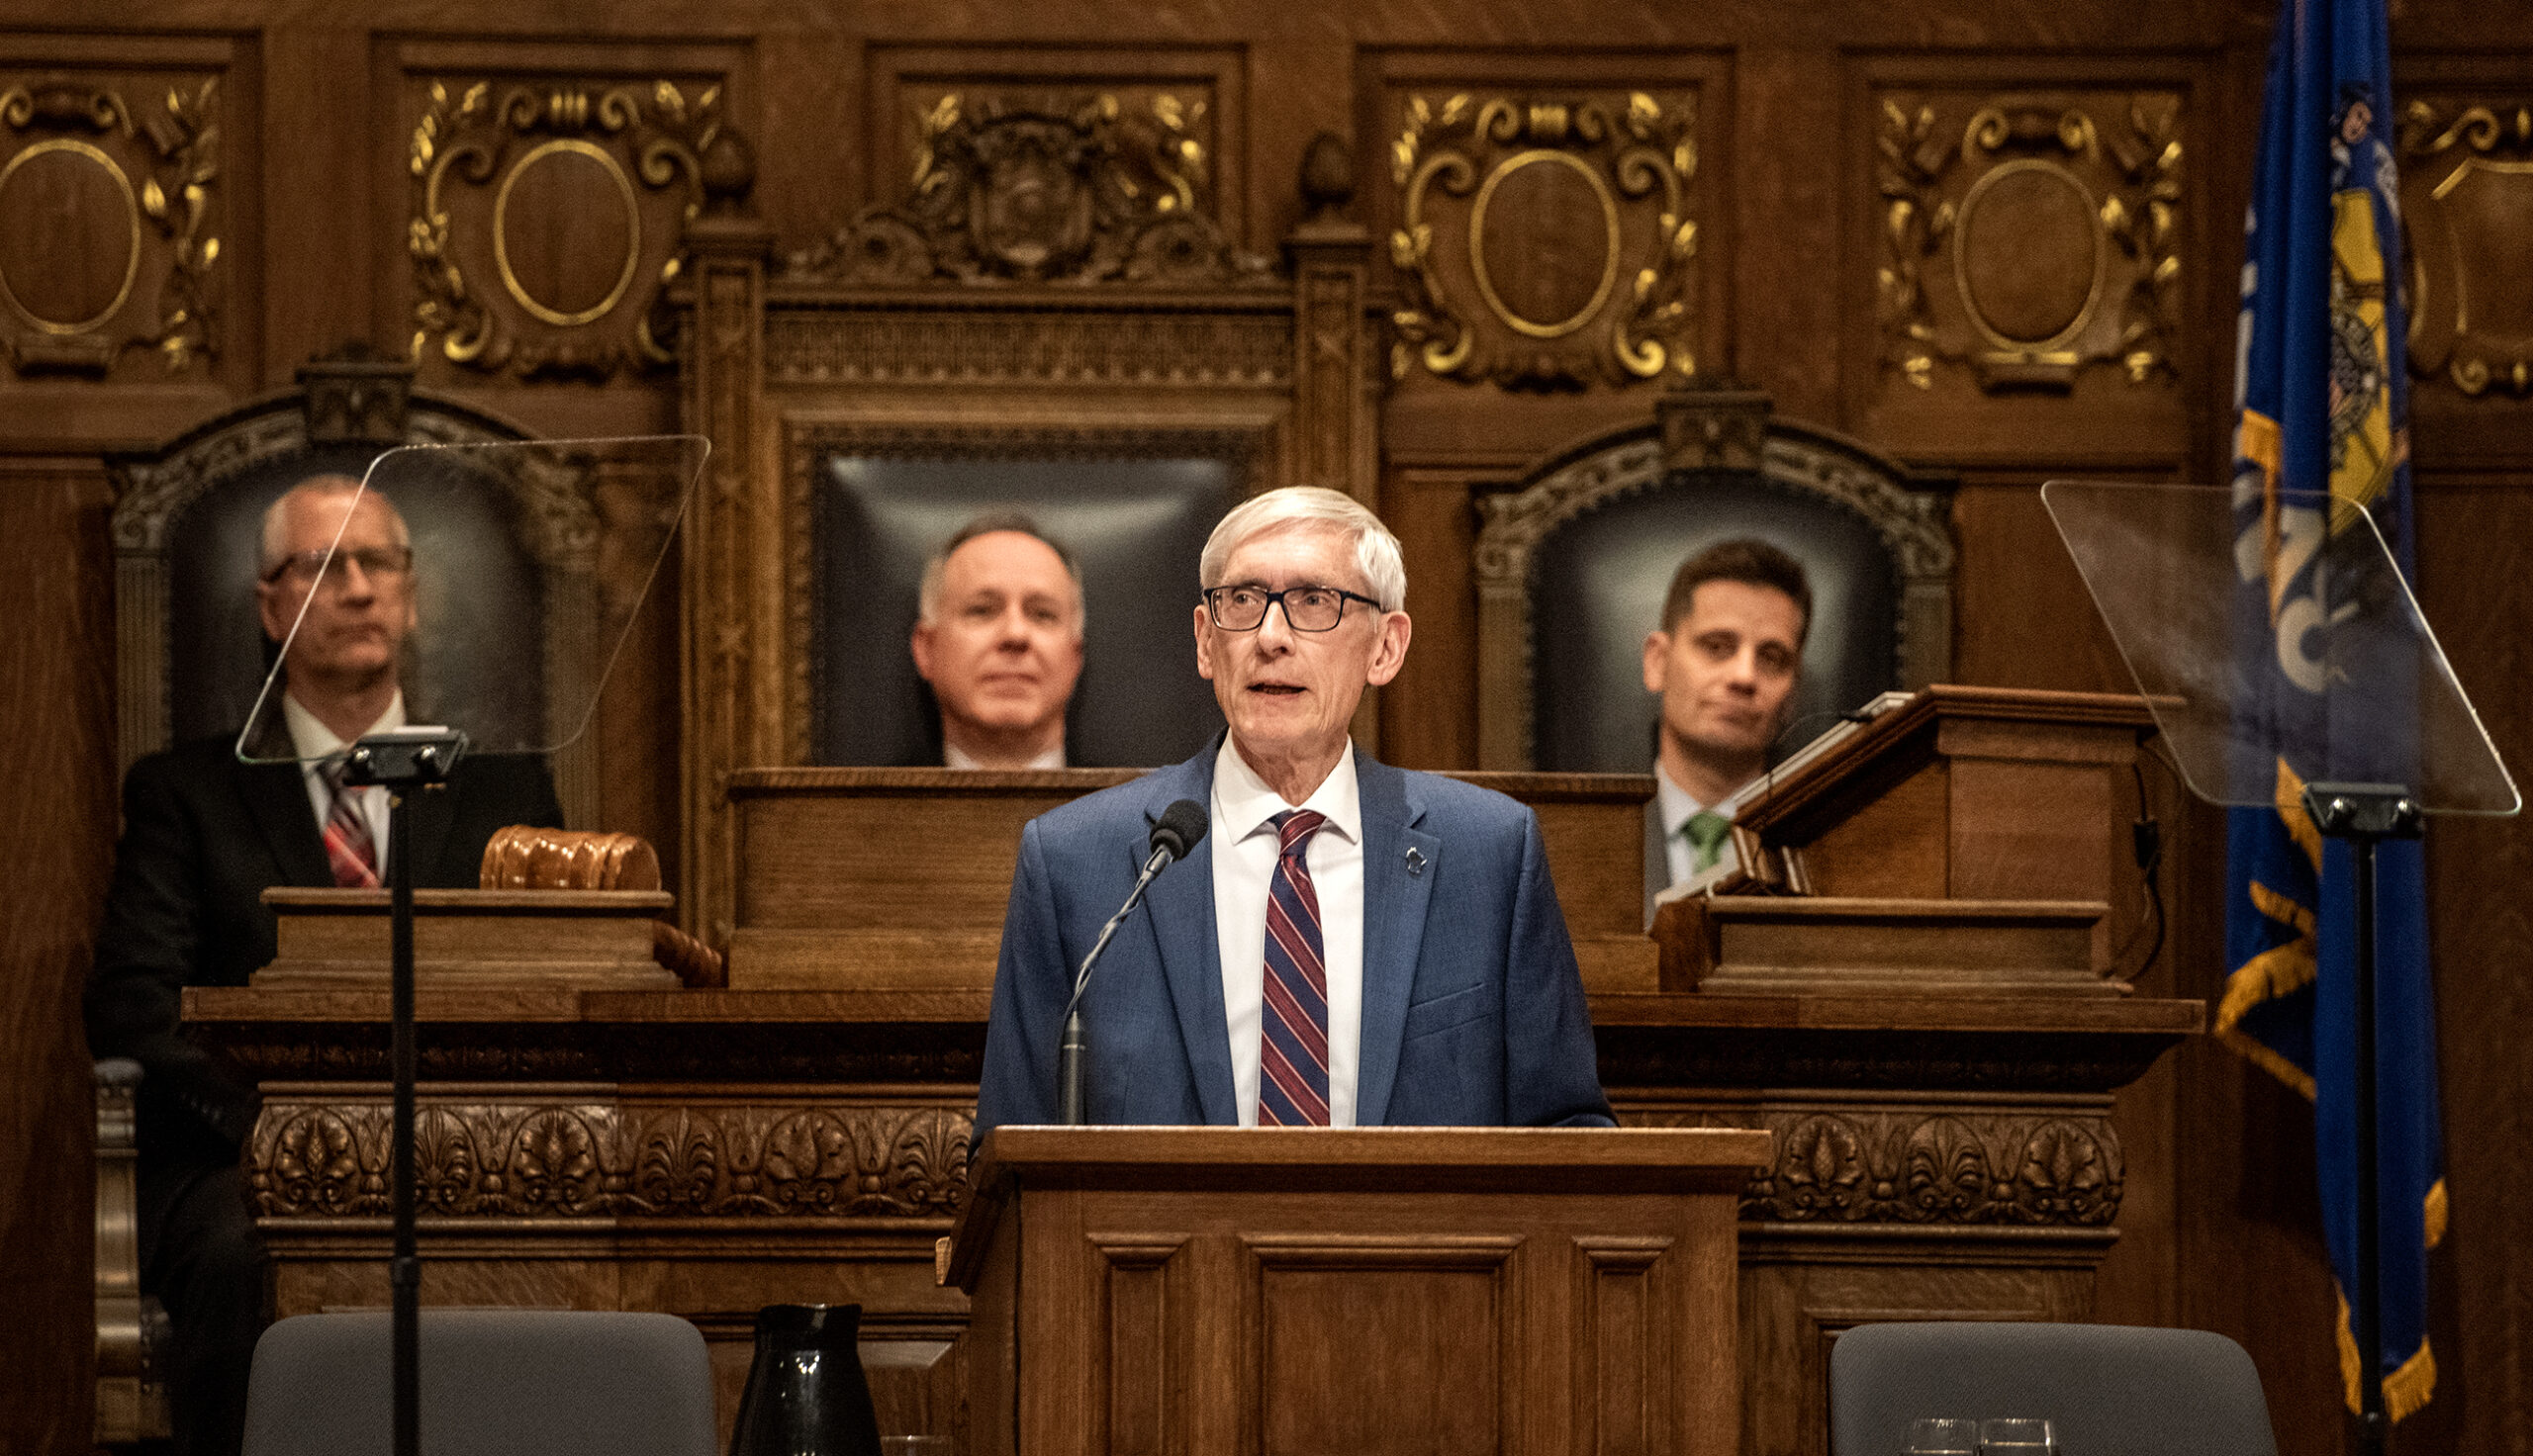 Gov. Evers stands in the Assembly chamber delivering a speech from the podium.